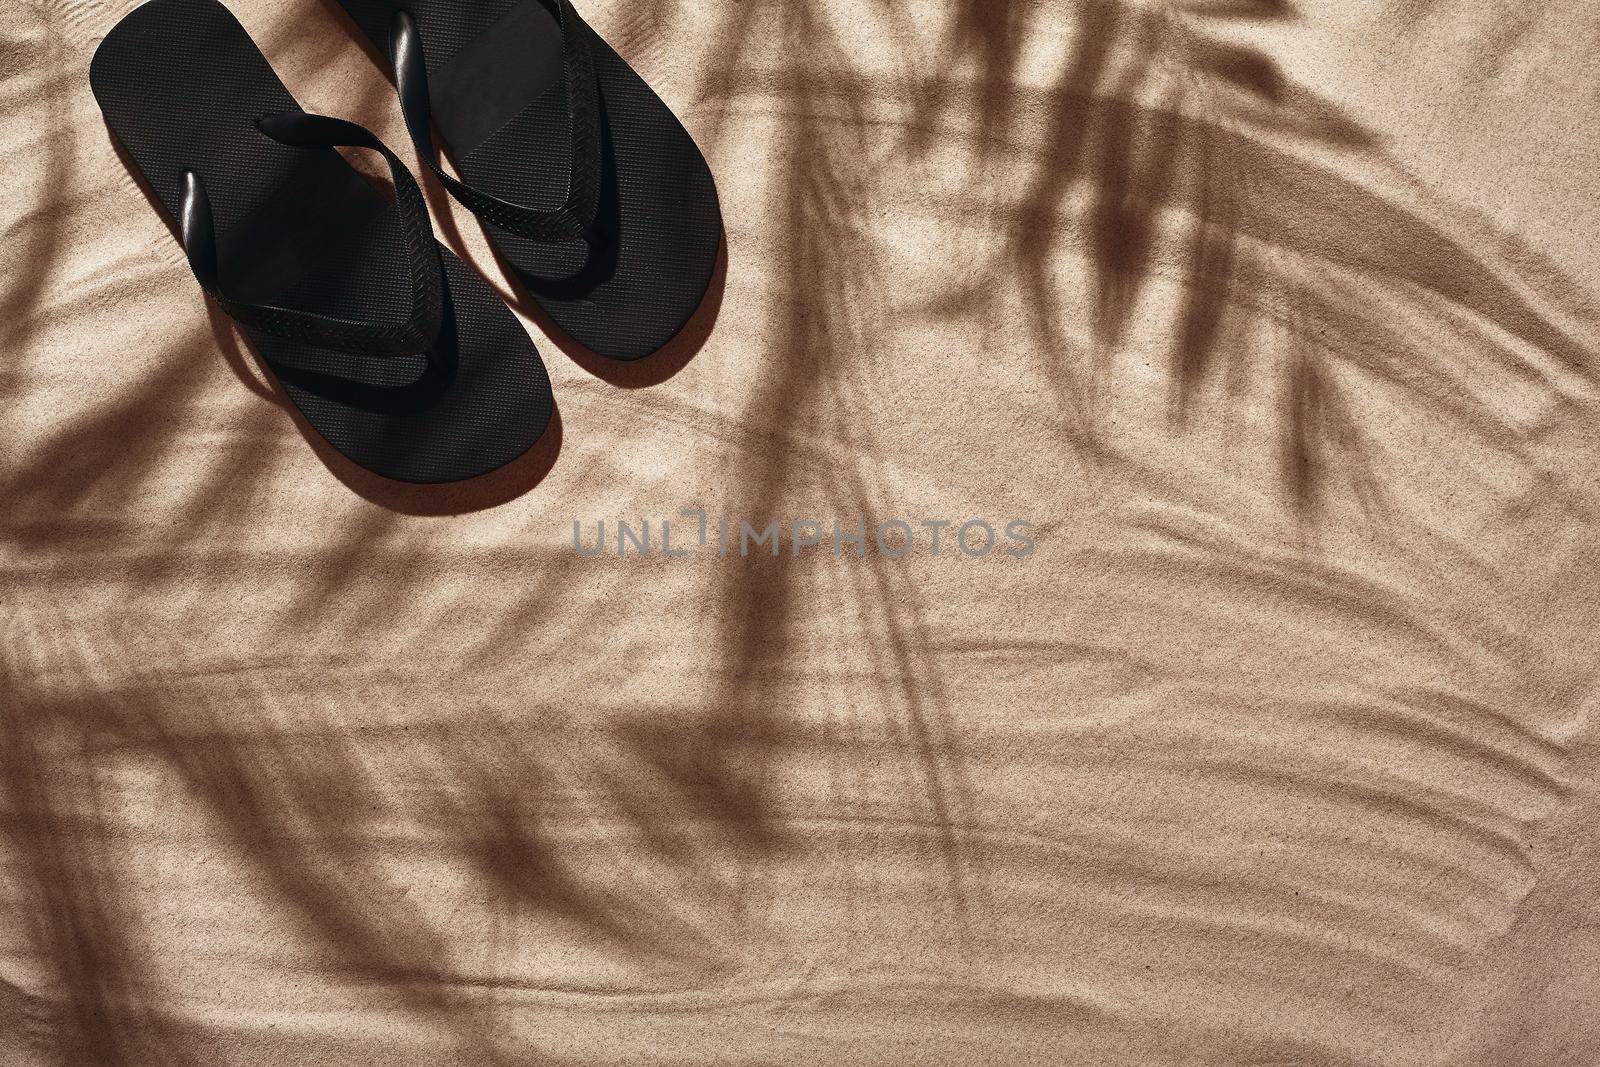 Summer concept with a shadow of a tropical palm tree leaves, copyspace. Black thongs are on a clean beach sand. Summertime lifestyle, objects in flat lay, top view arrangement.